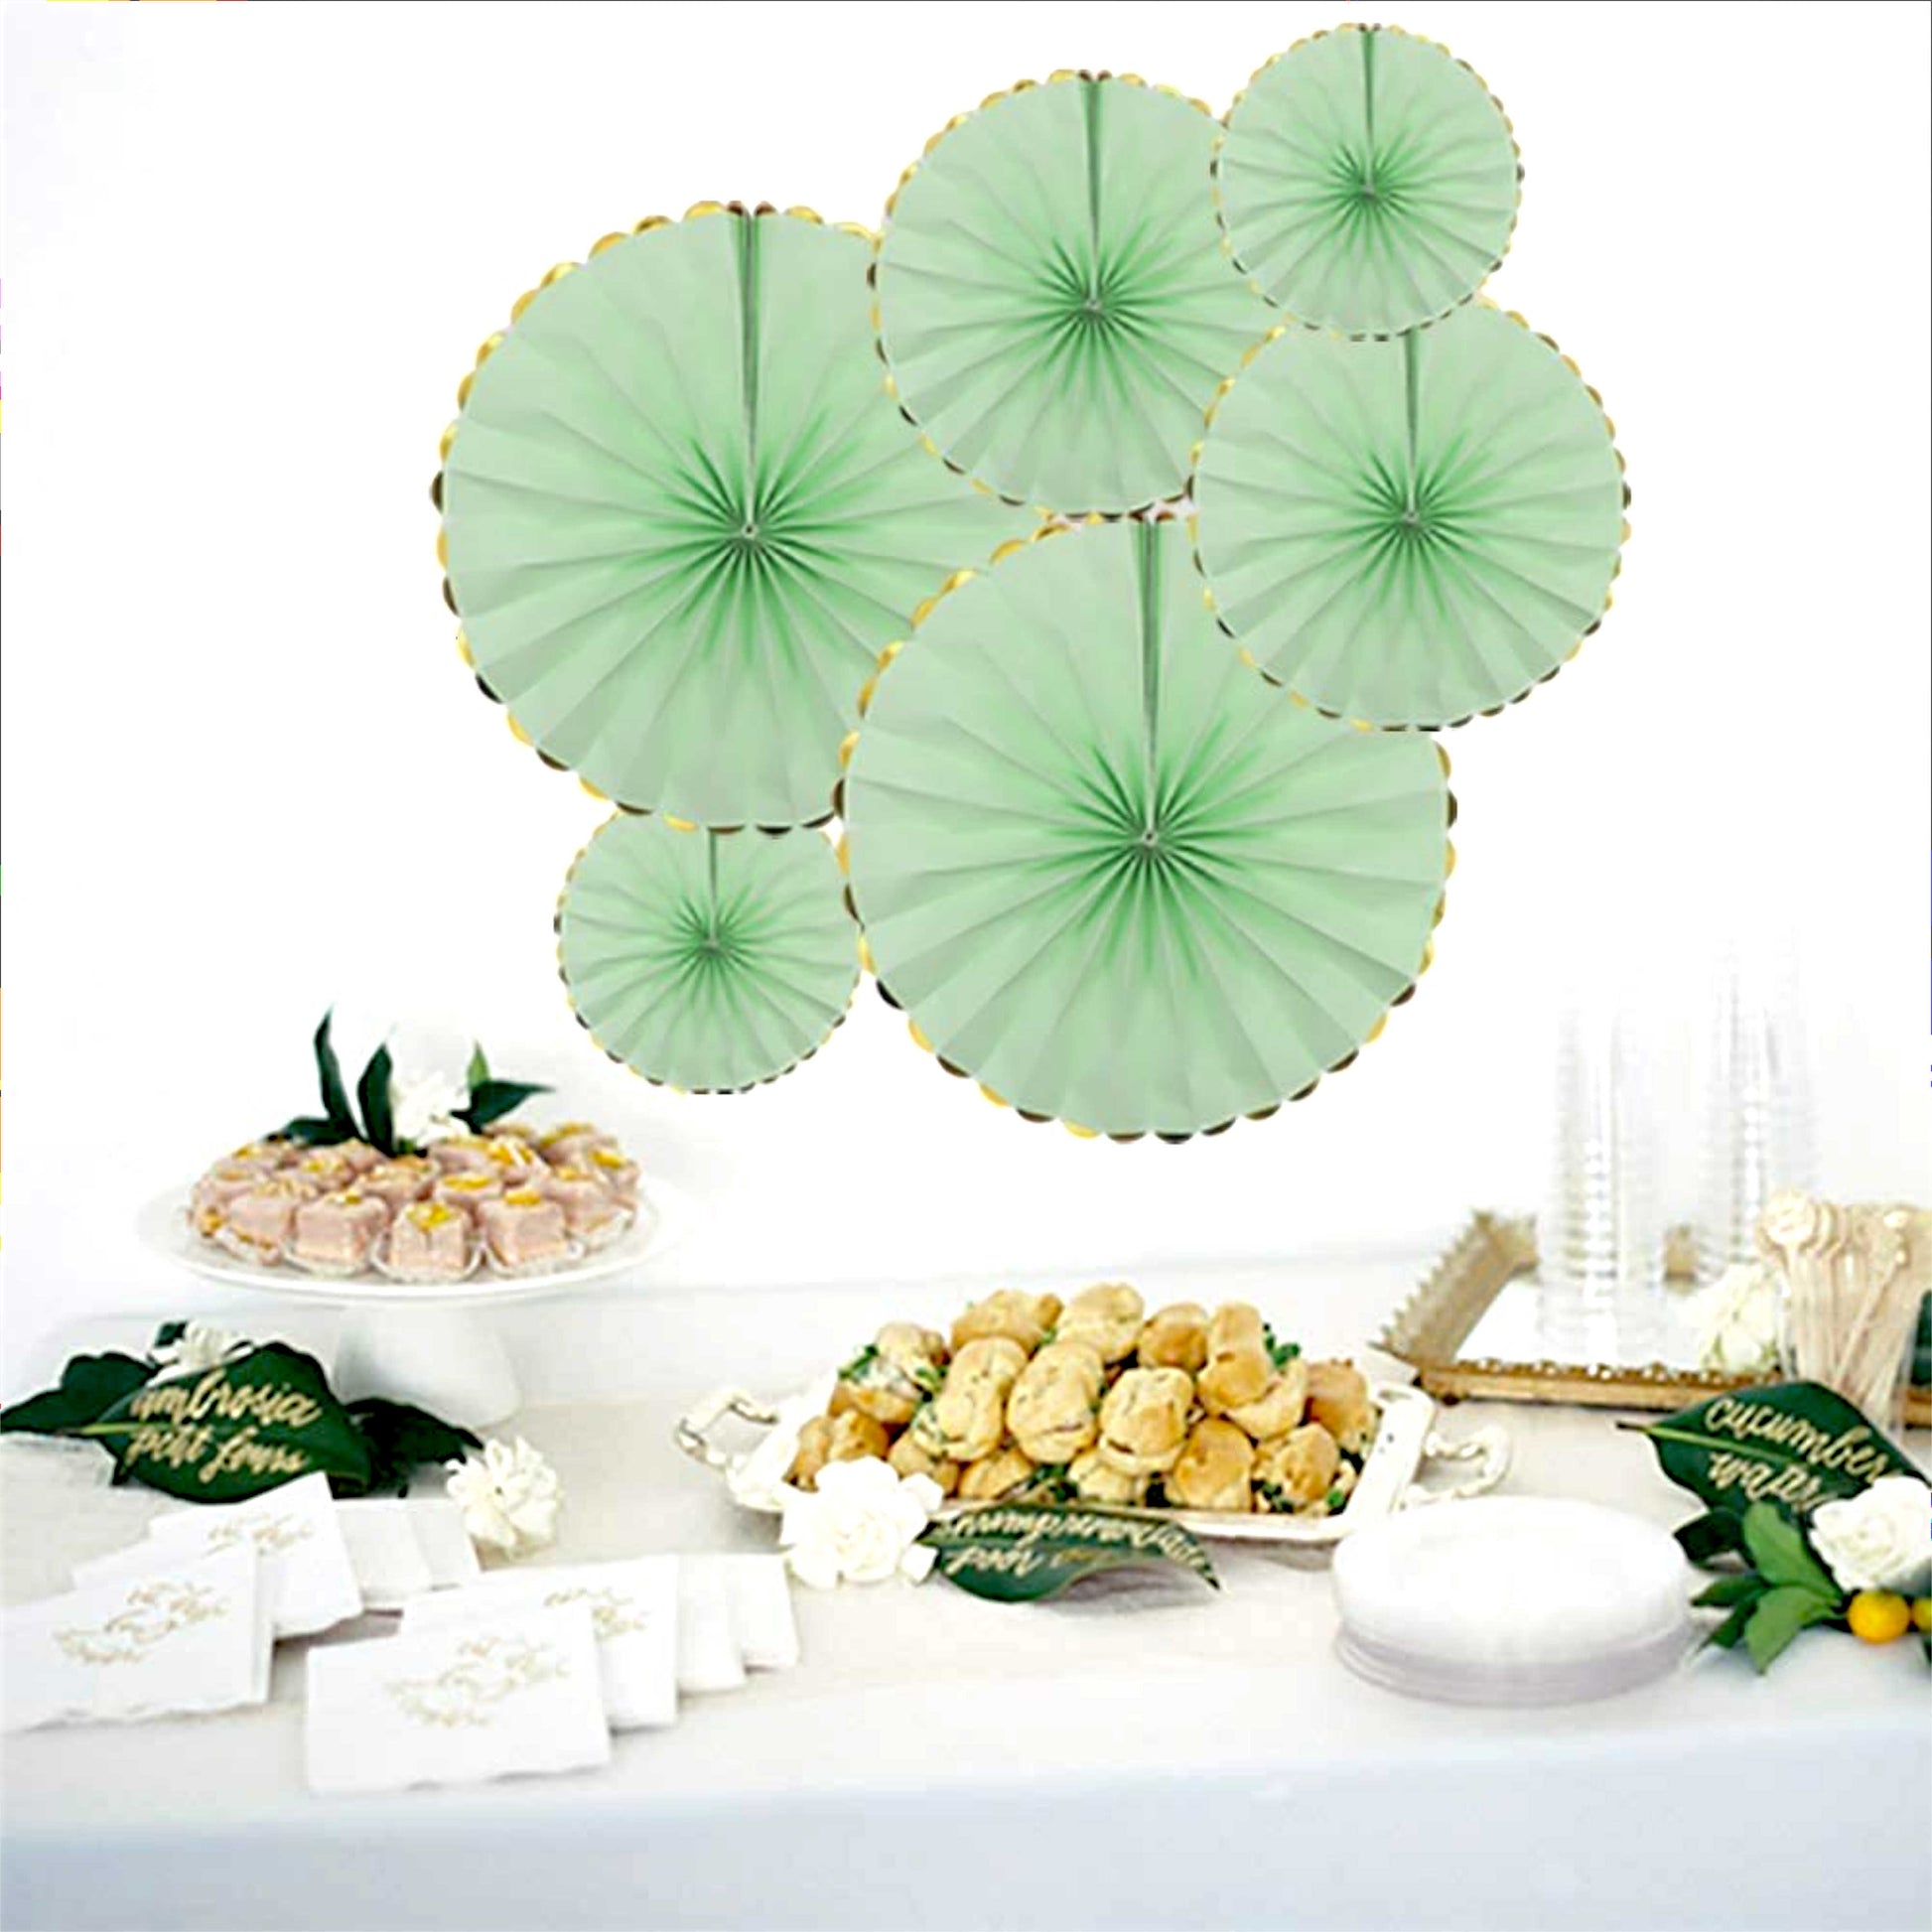 6 Pcs Round Shape Japanes Decorative Backdrop Hanging Paper Fan Set For Party, Birthday, Wedding, Fastivals, Room Decoration